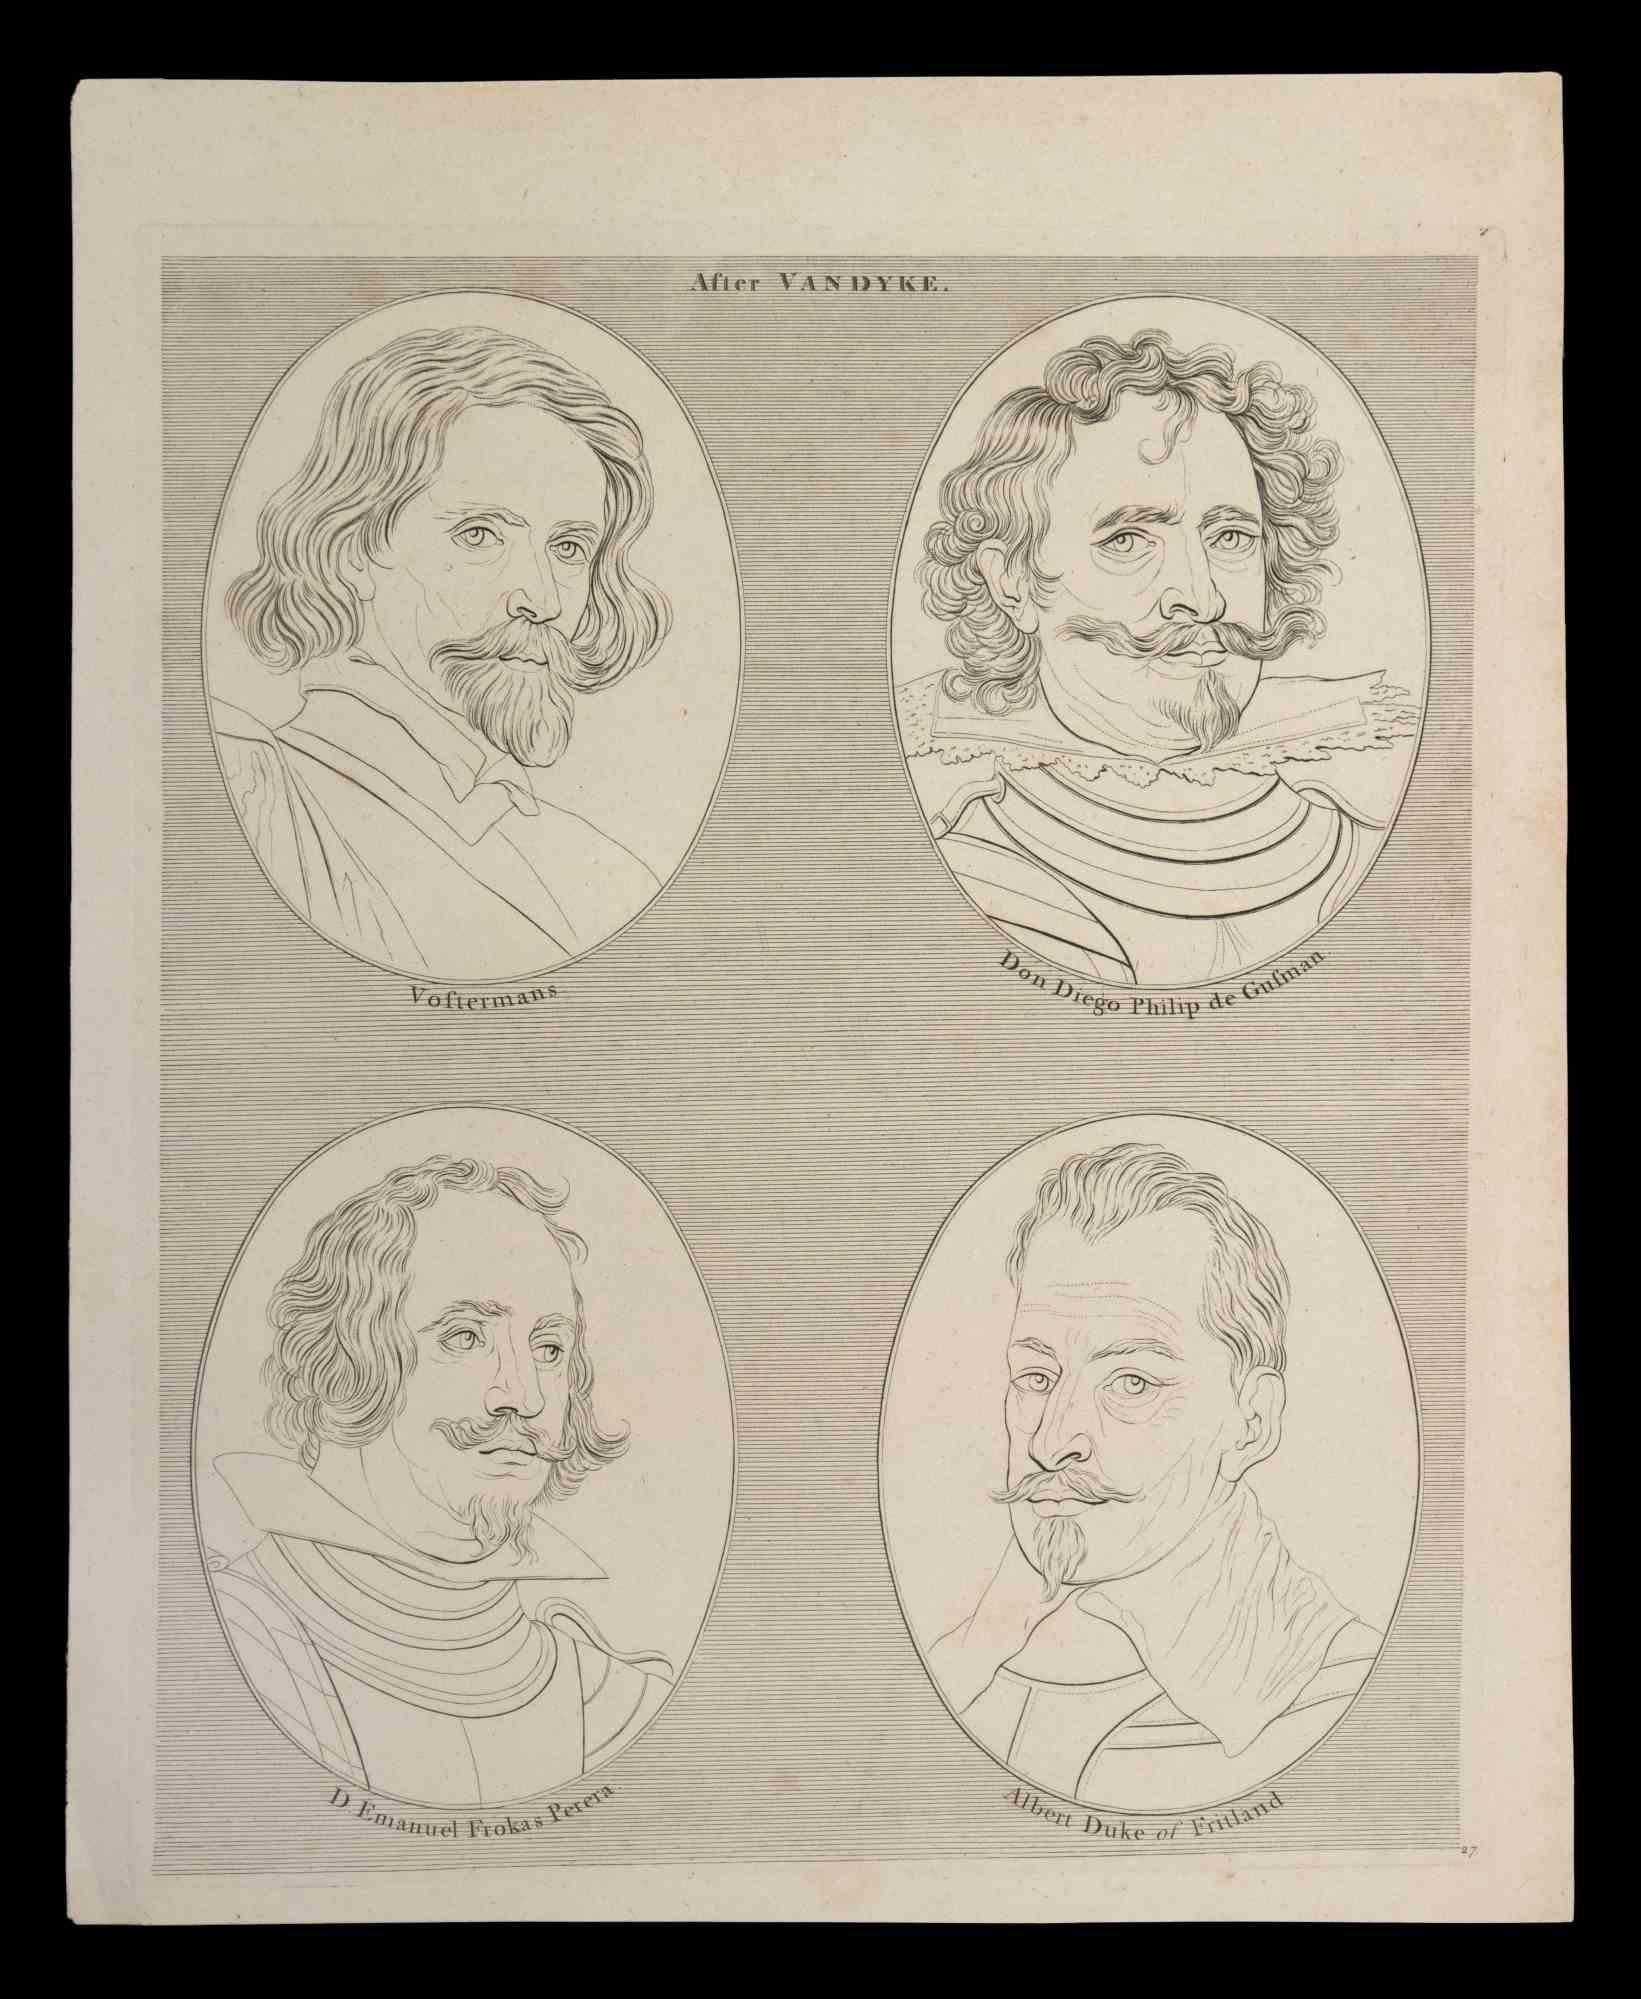 Portraits after Vandyke is an original etching artwork realized by Thomas Holloway for Johann Caspar Lavater's "Essays on Physiognomy, Designed to Promote the Knowledge and the Love of Mankind", London, Bensley, 1810. 

Good conditions, except for